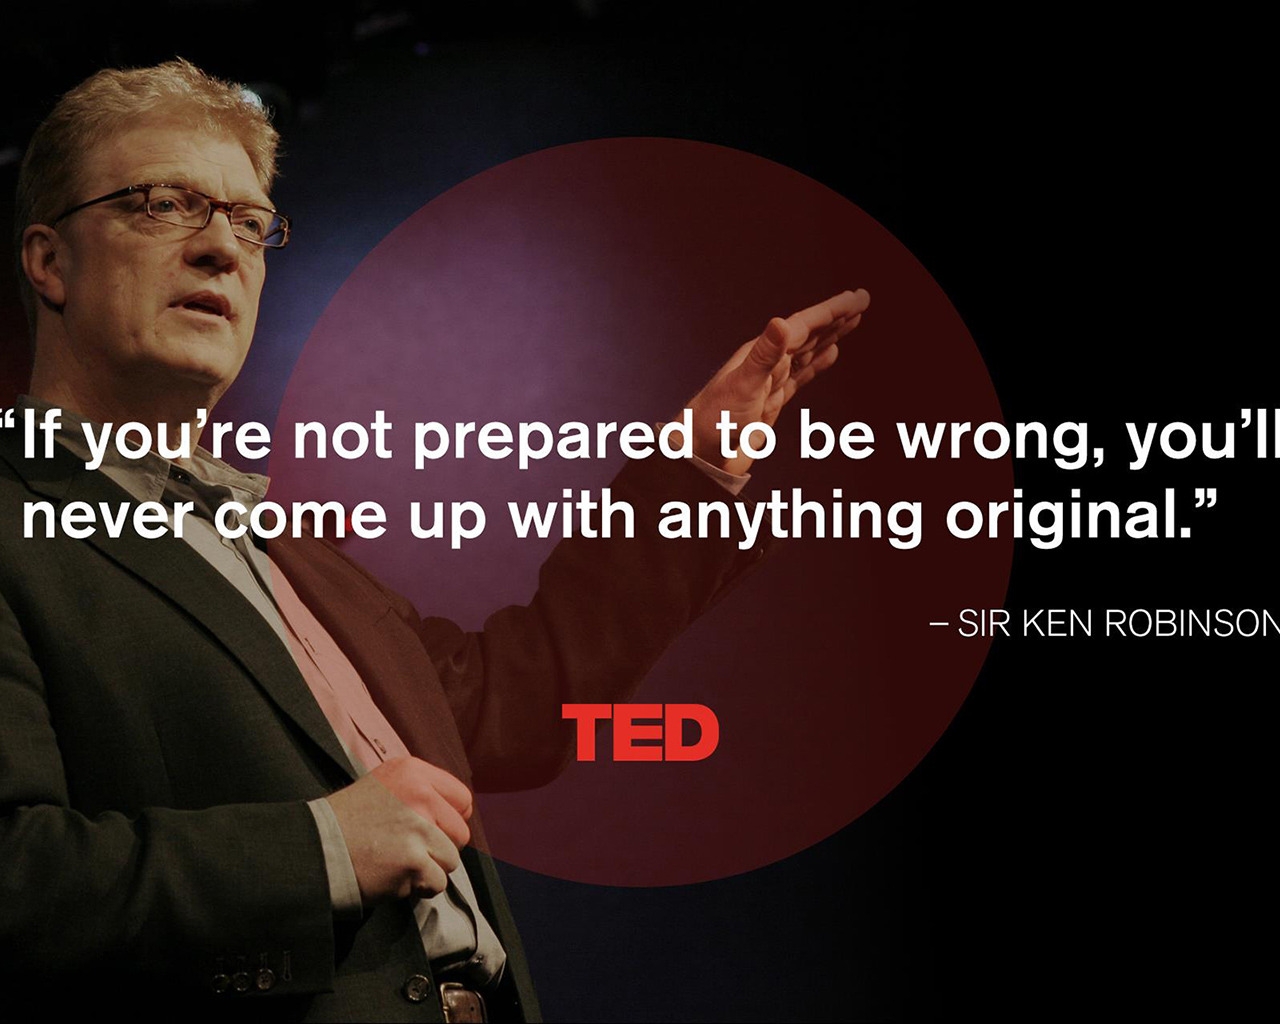 Sir Ken Robinson Quote for 1280 x 1024 resolution